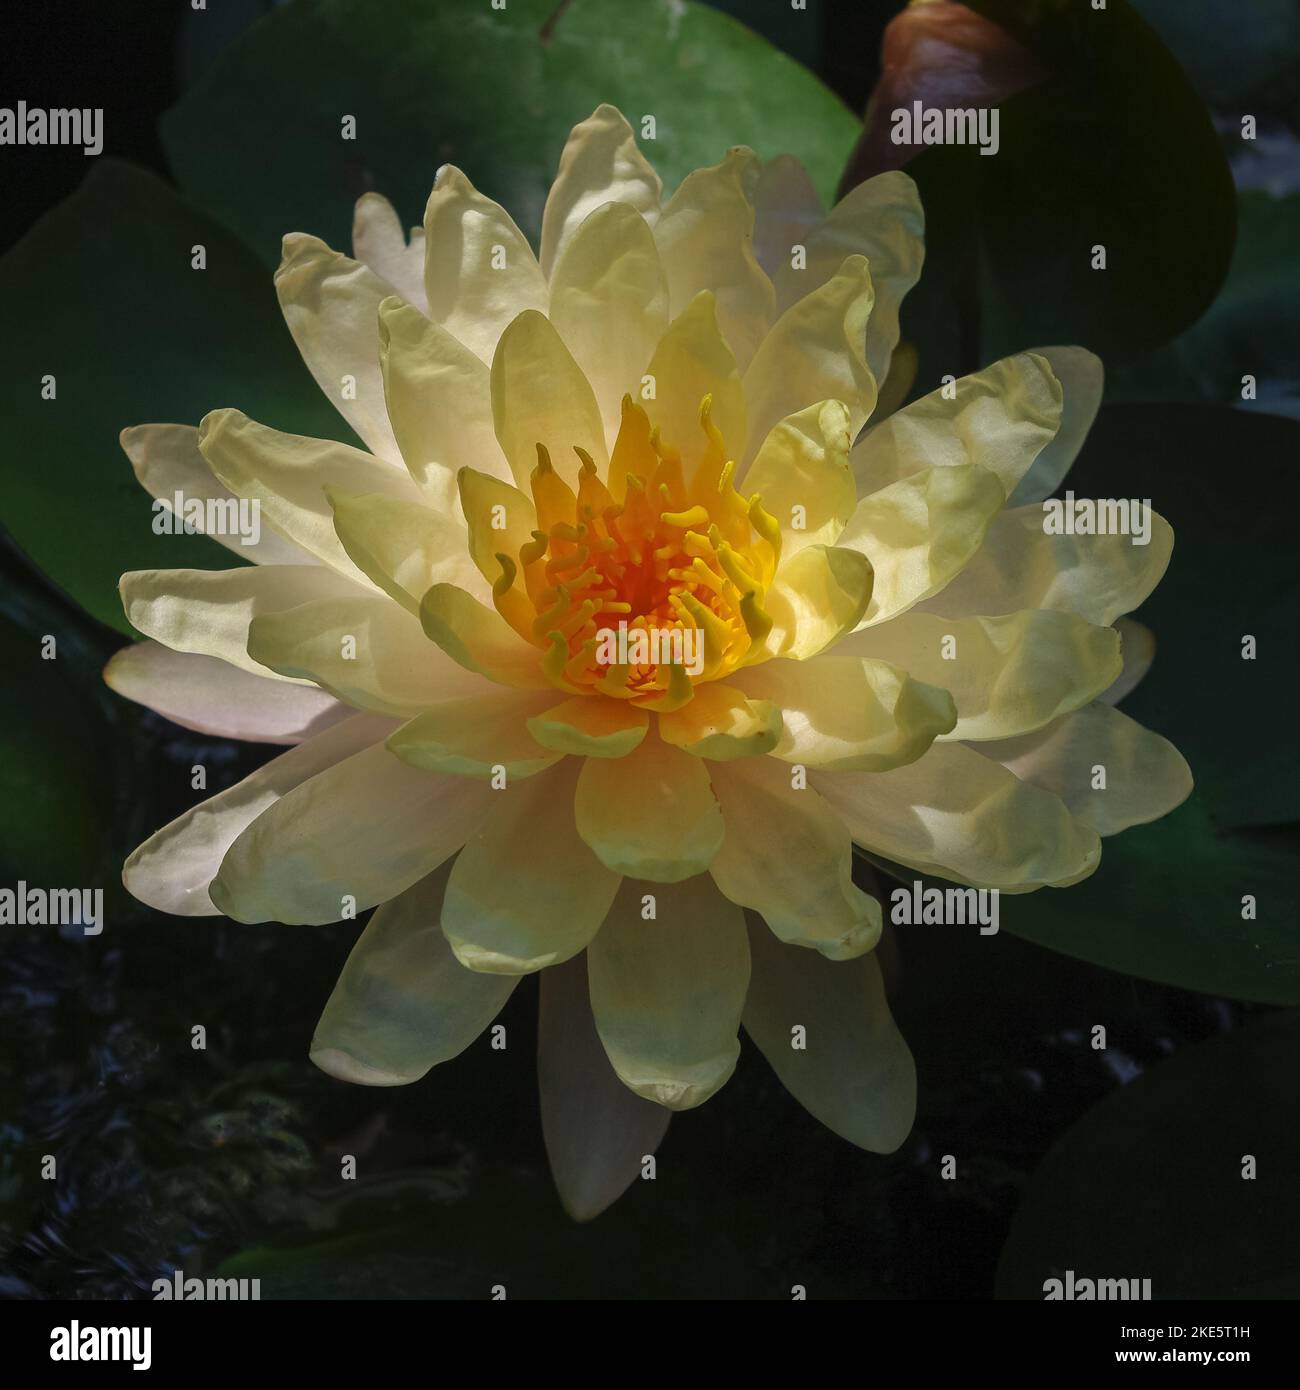 Closeup view of beautiful creamy yellow and orange water lily ' mangkala ubol ' flower blooming outdoors in tropical garden Stock Photo